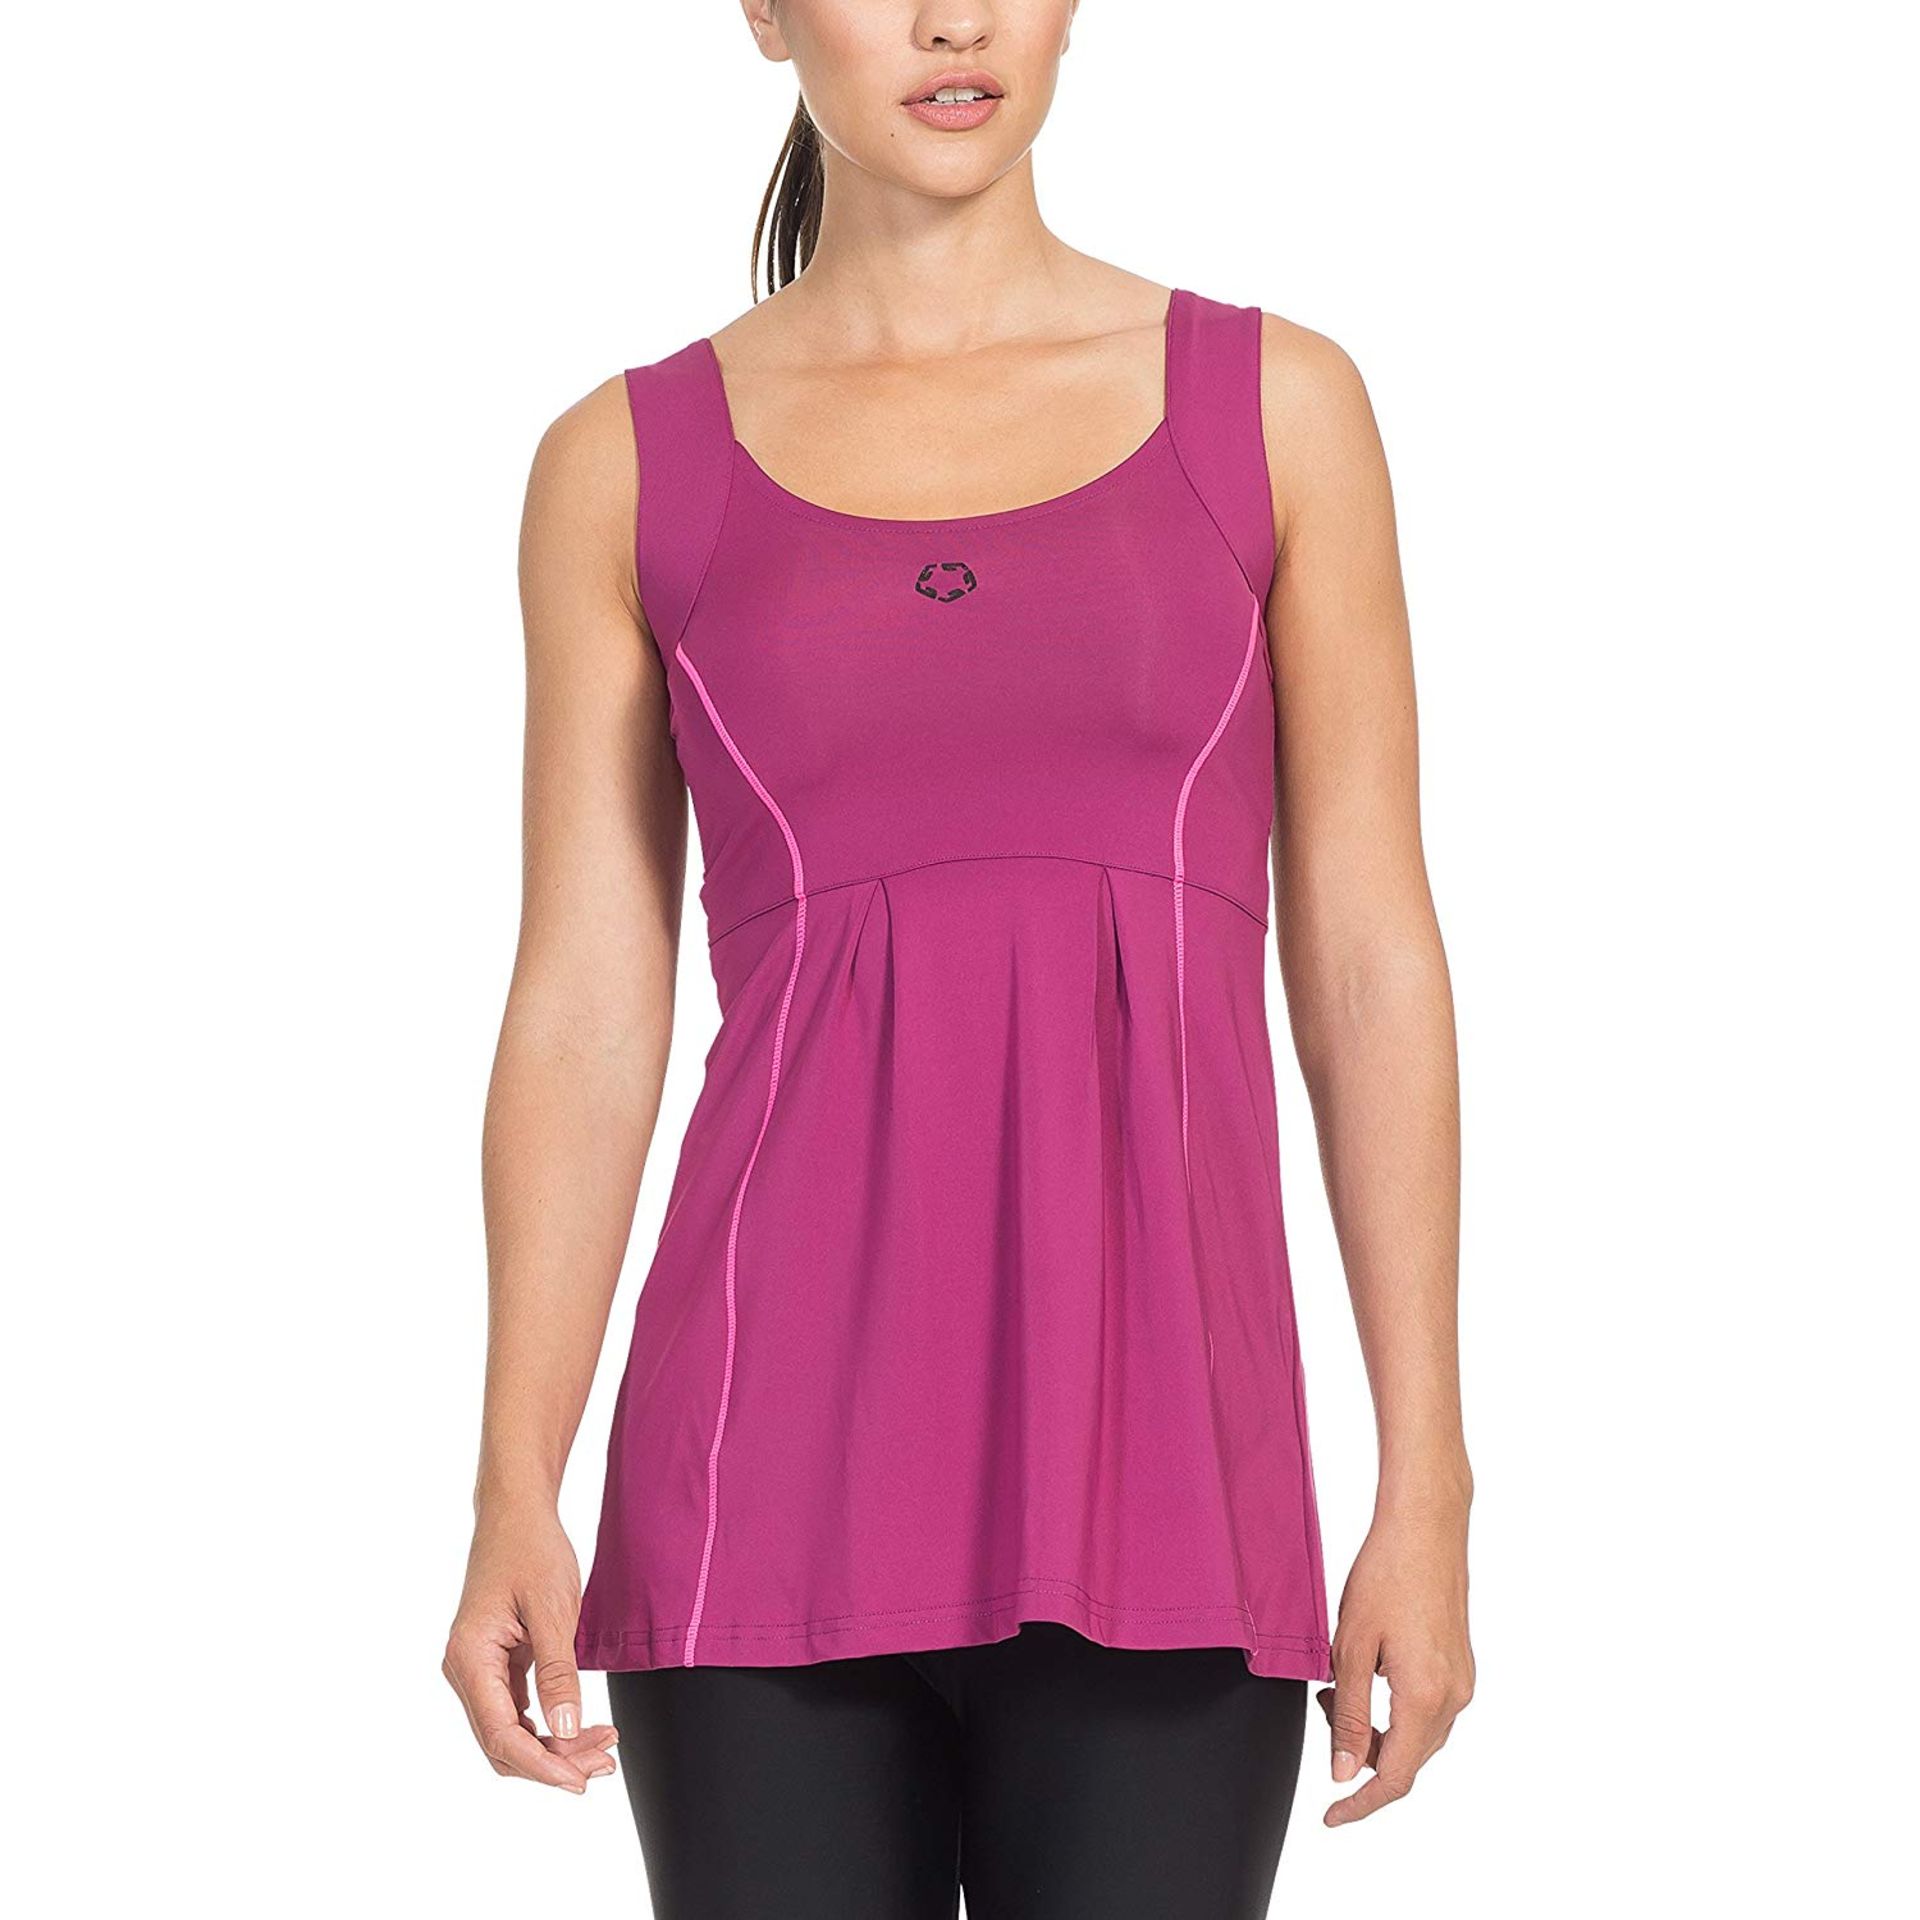 Brand new Gregster Compression Top –Running Top Size S RRP £30